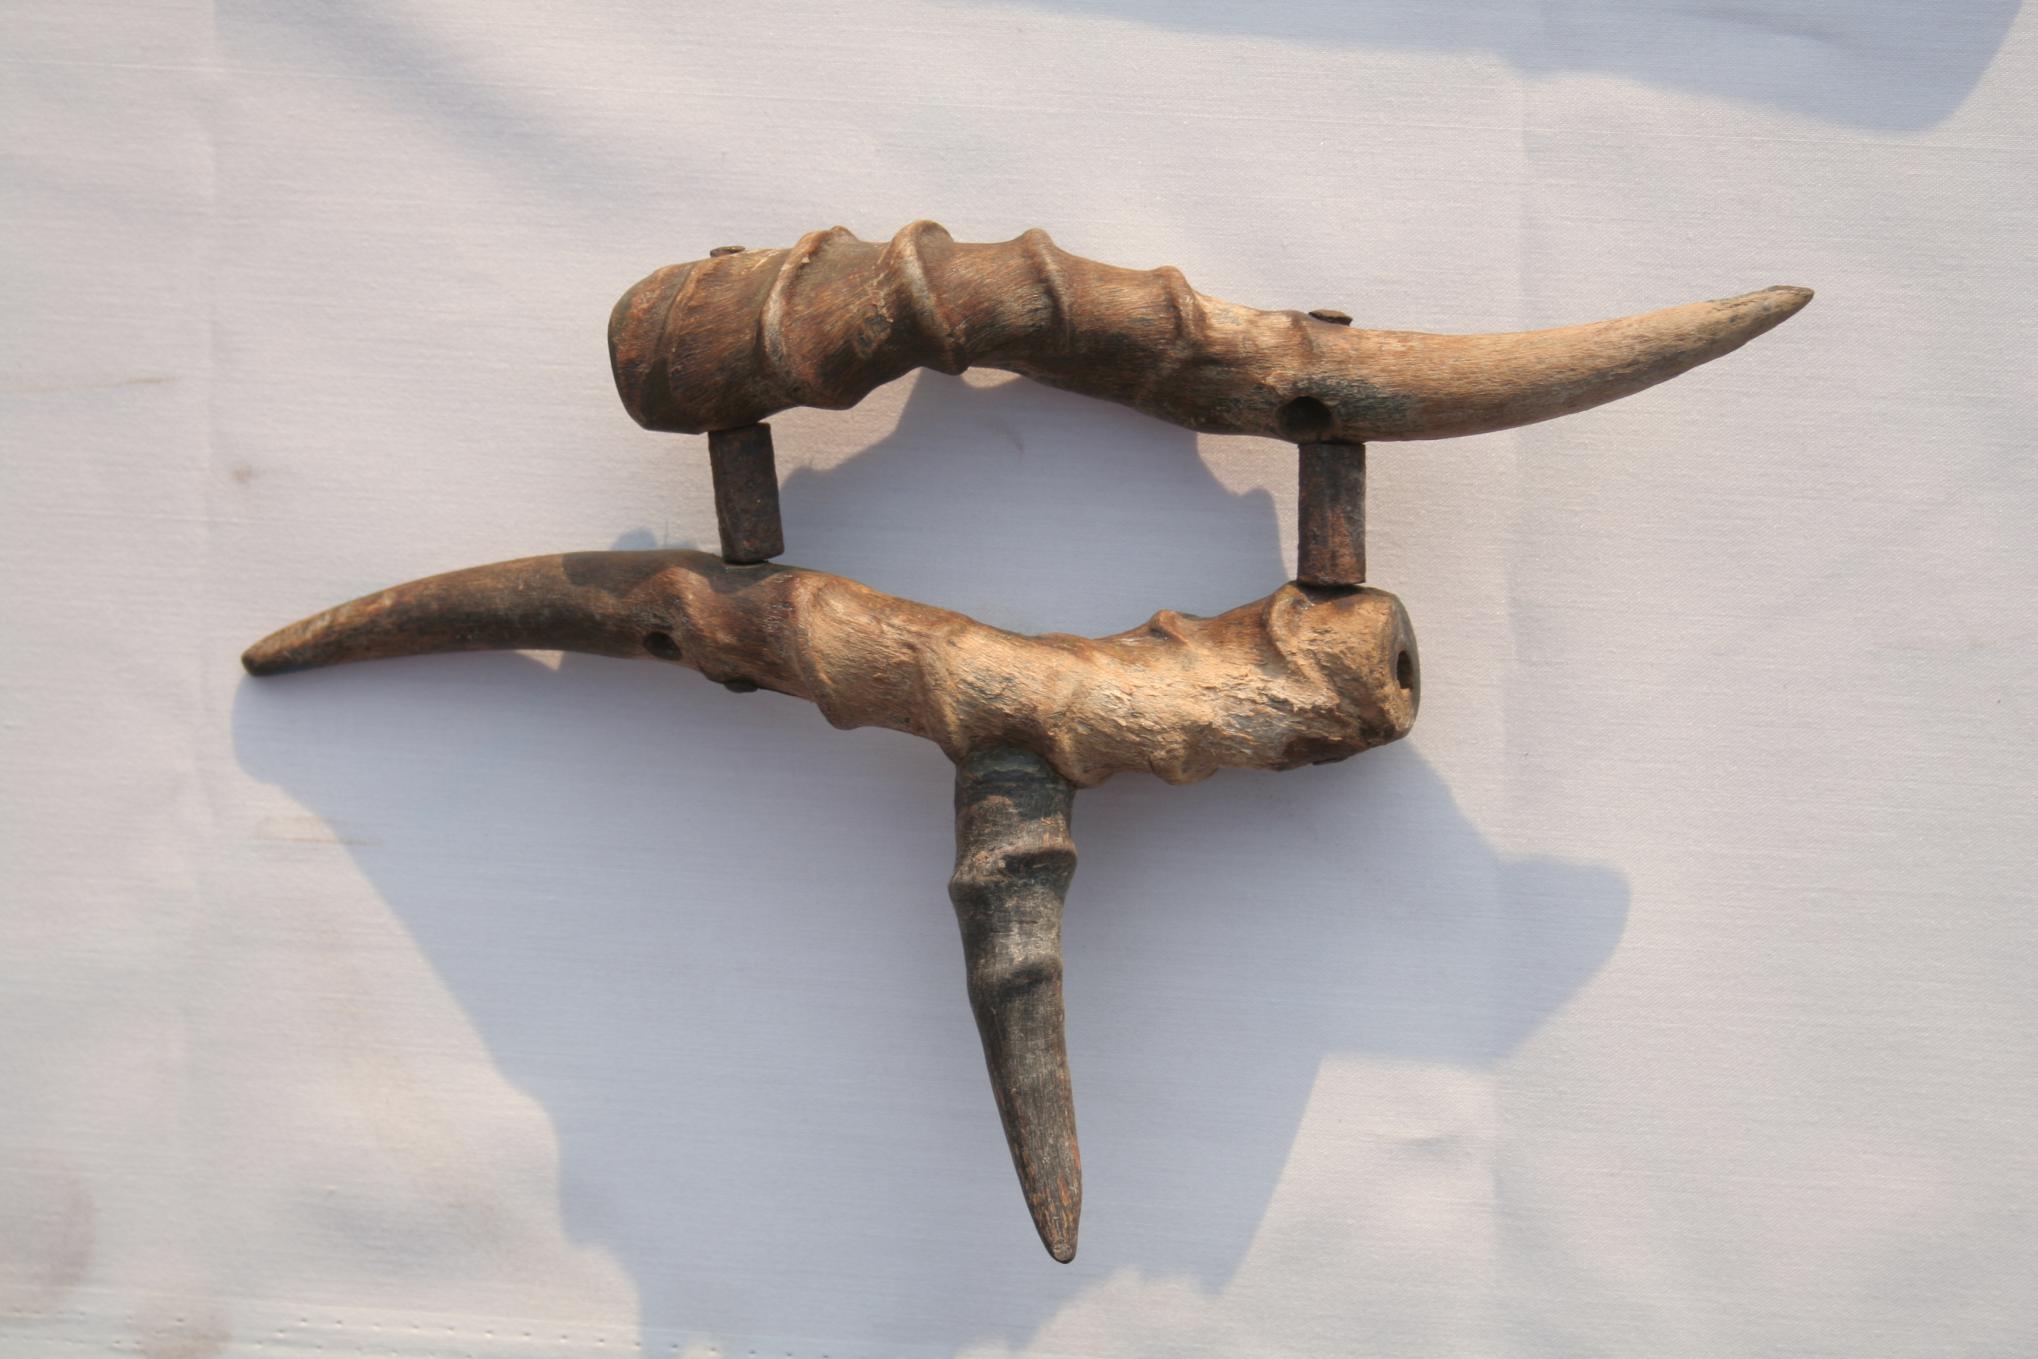 Madu, Ancient weapon made with horns of Antelope